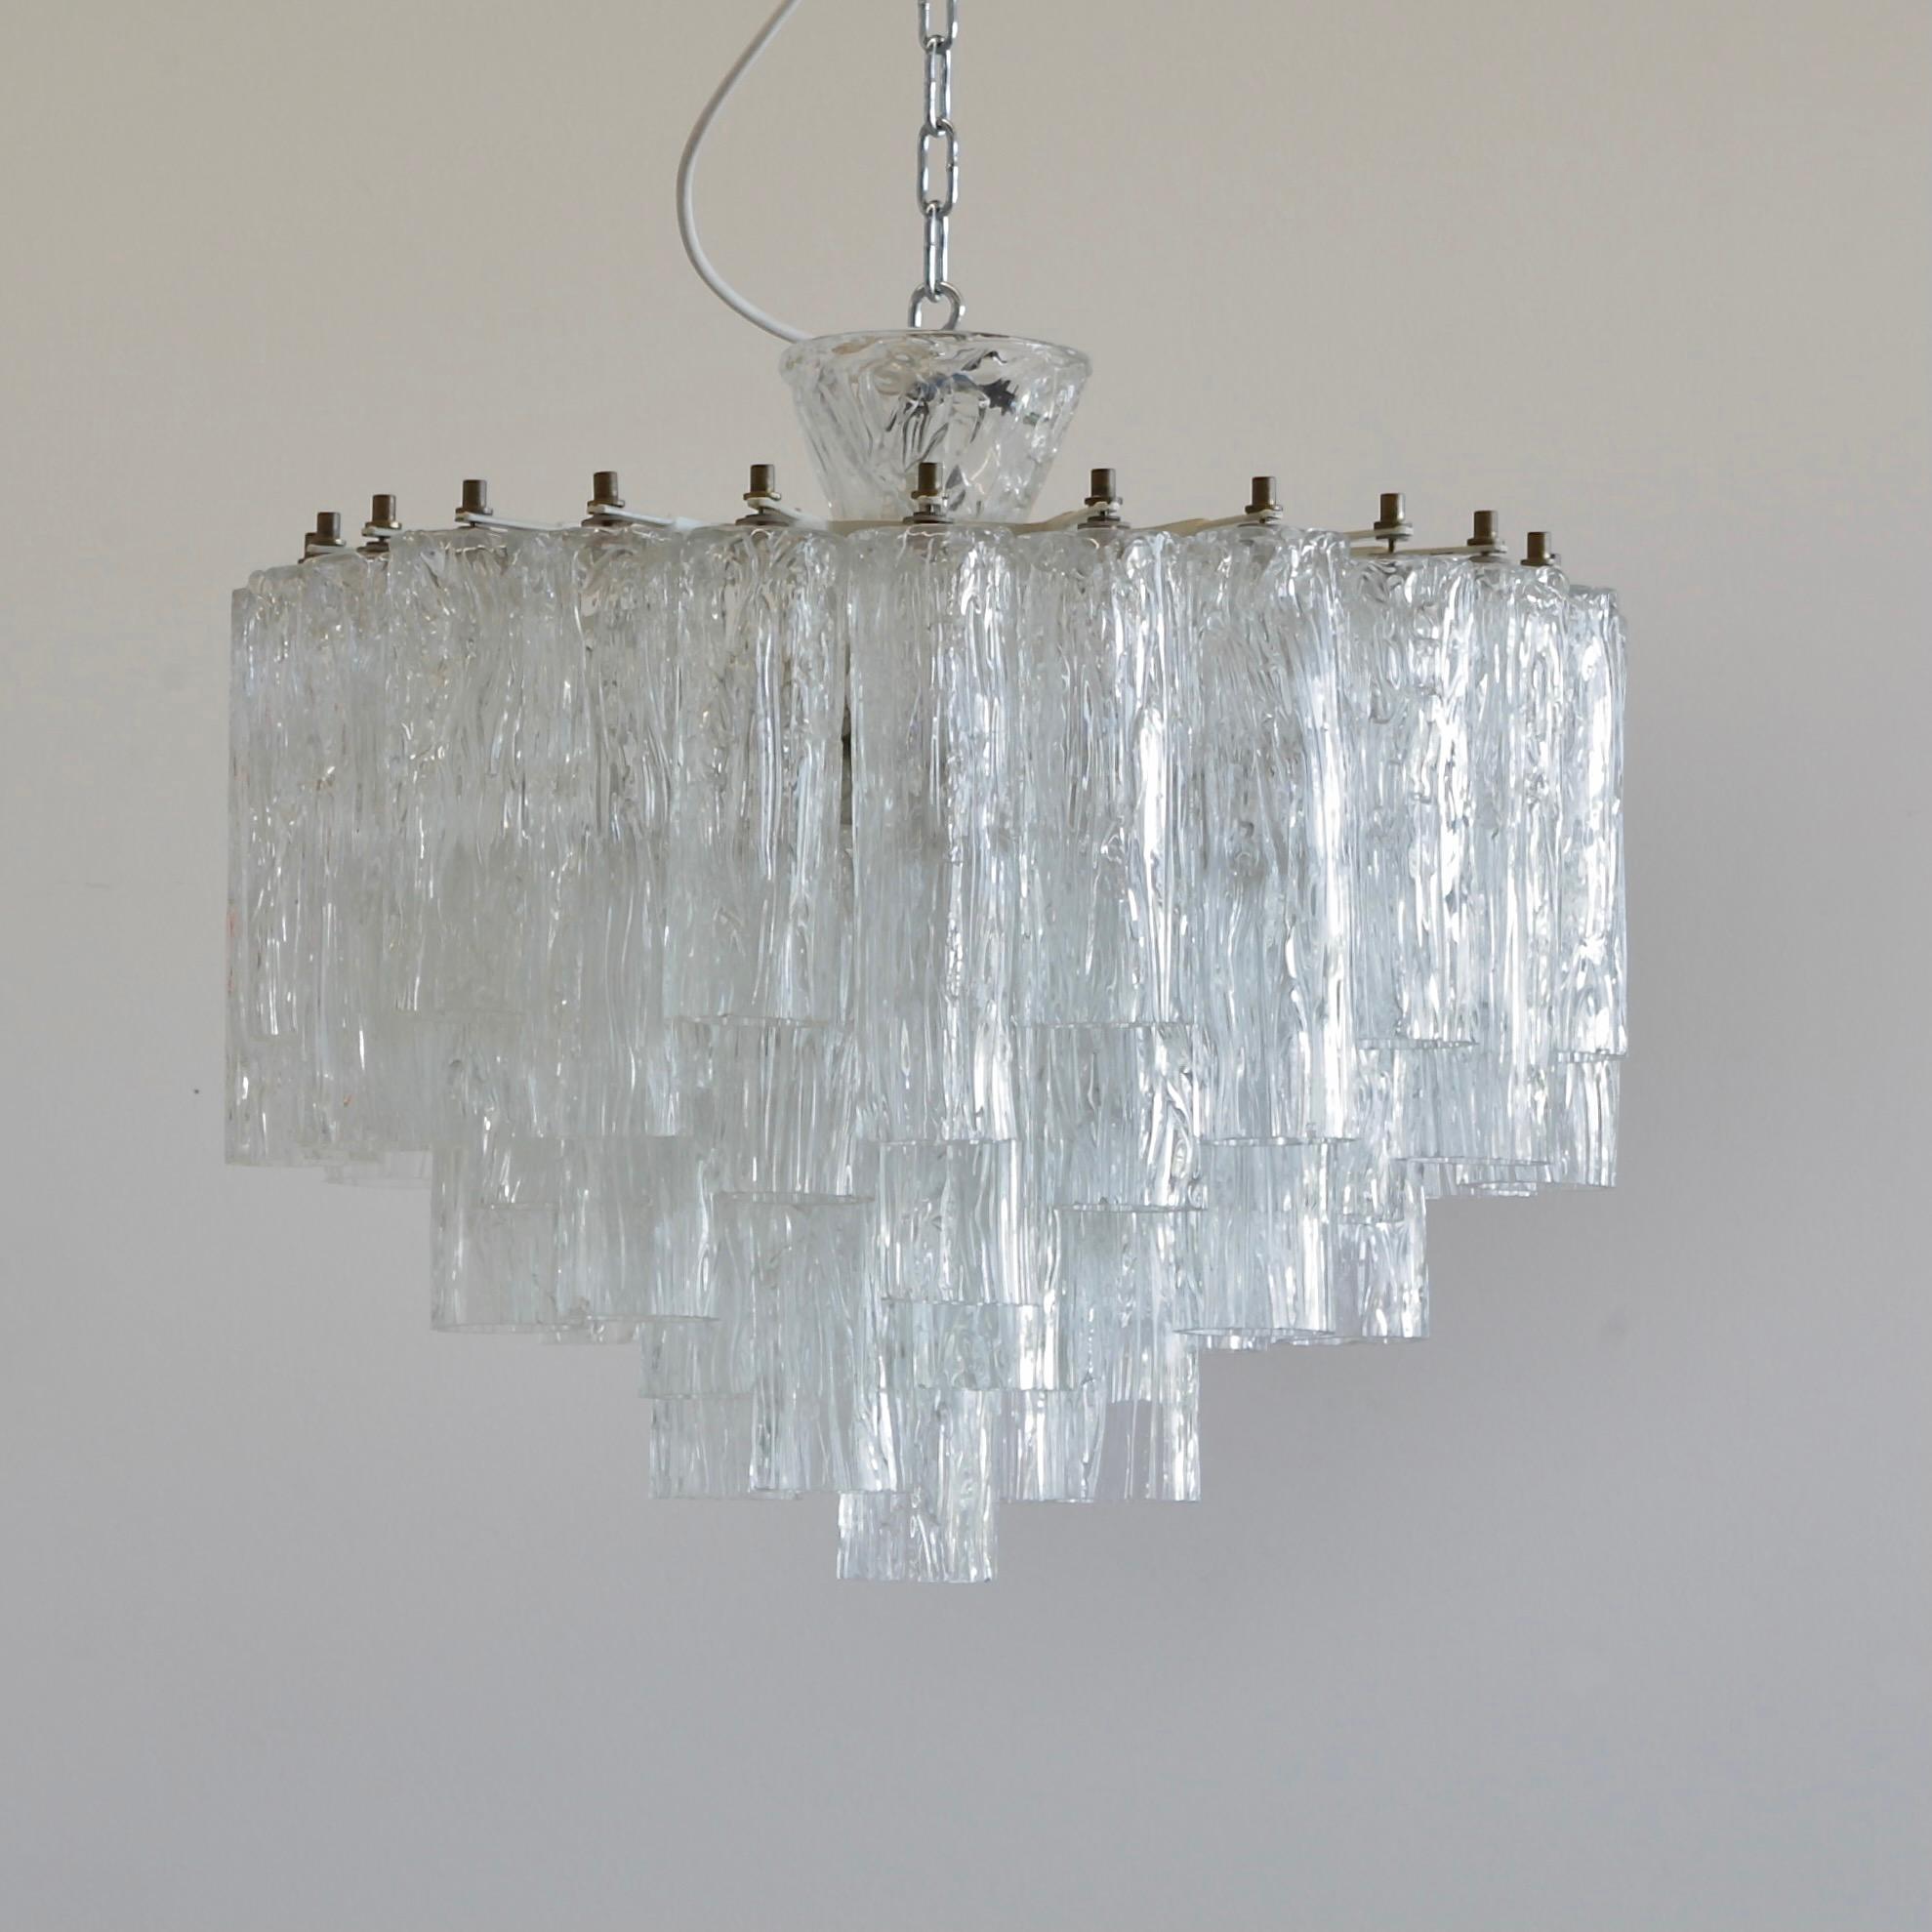 Corteccia' glass chandelier. Italy, Murano, 1960s.

An early glass chandelier with clear glass 'Corteccia' glass made in Murano. Multi-tier glass chandelier with white metal frame, brass detail and a 'Corteccia' glass cup. Super elegant!
 